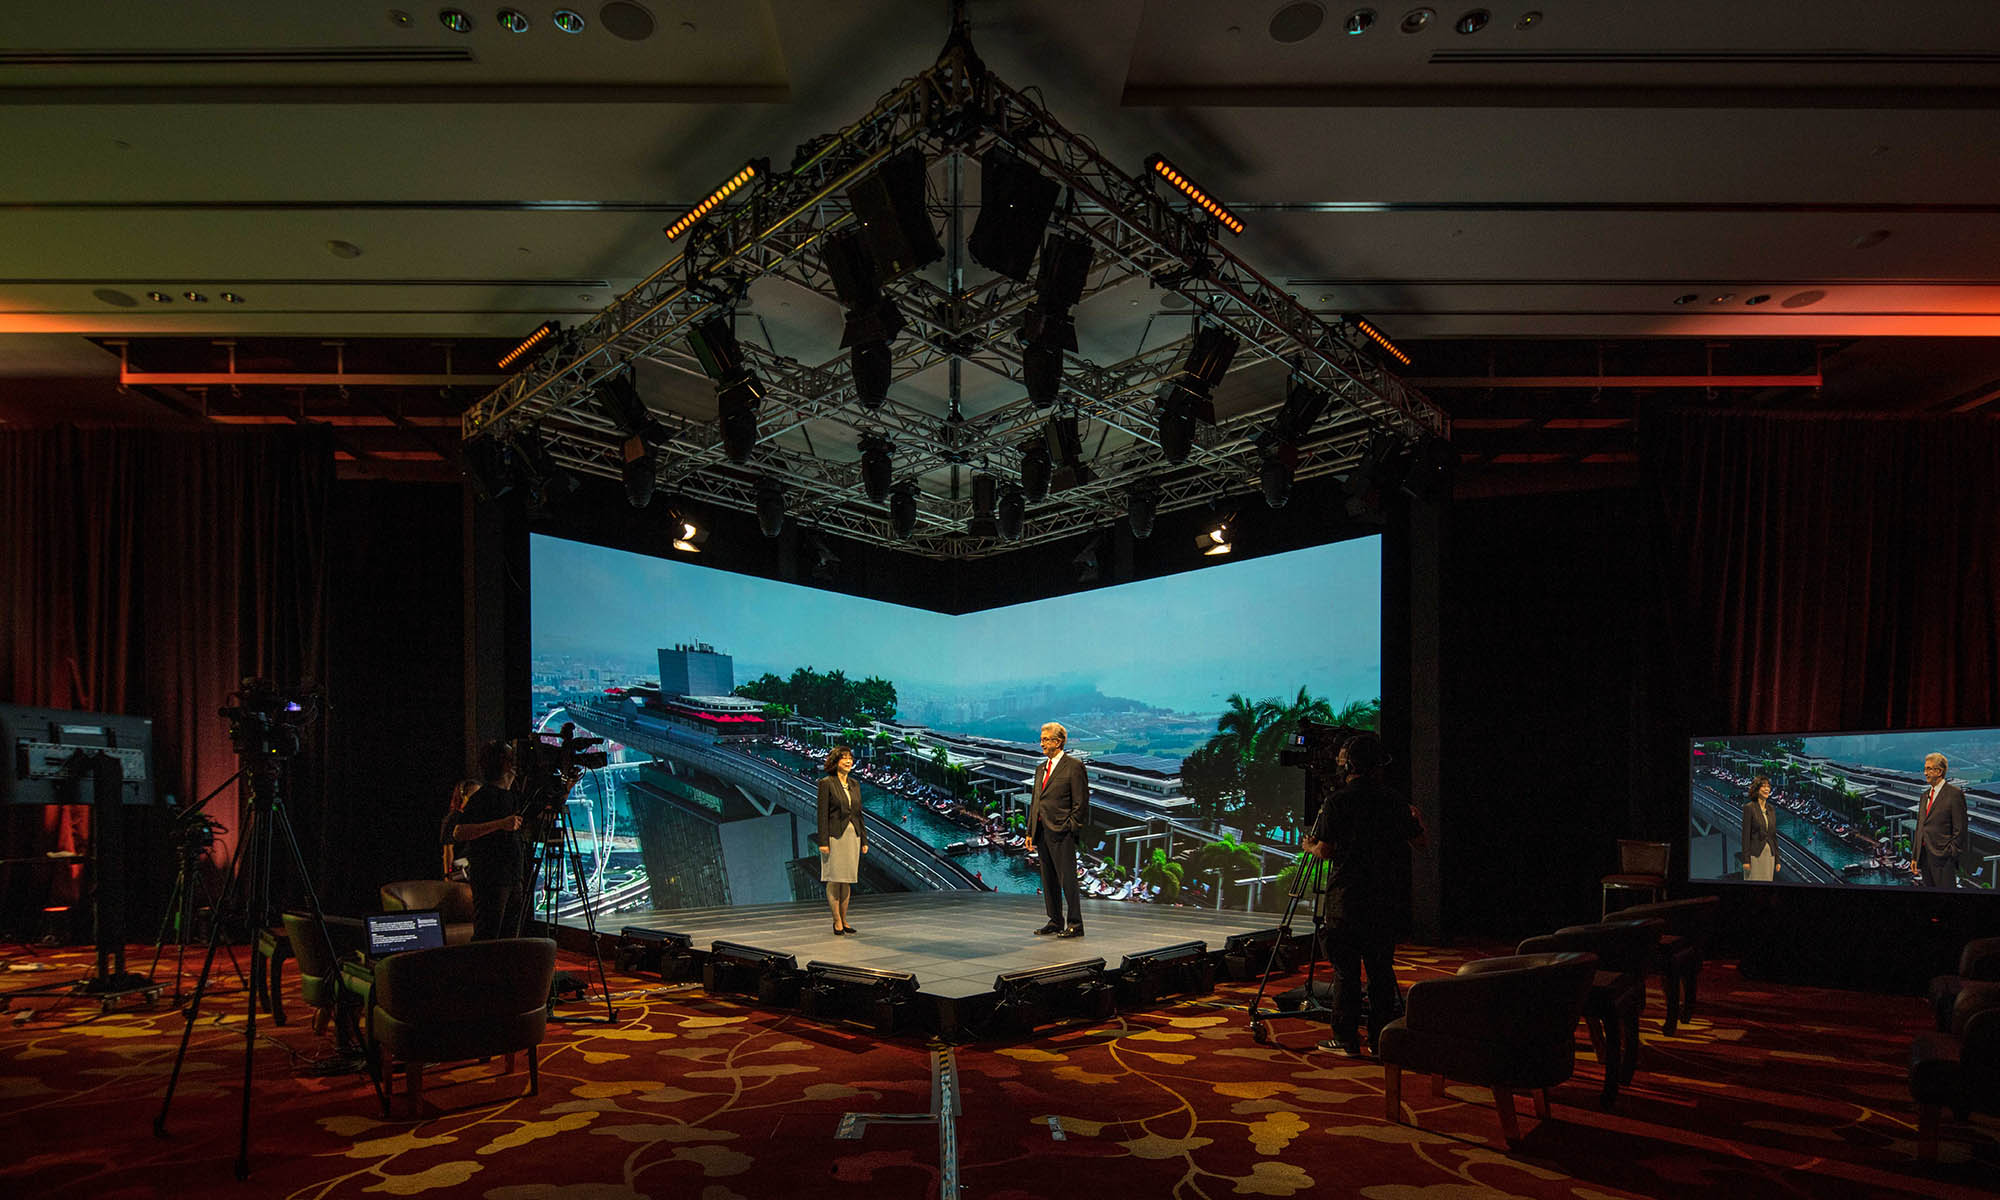 Marina Bay Sands launches industry’s first hybrid event broadcast studio